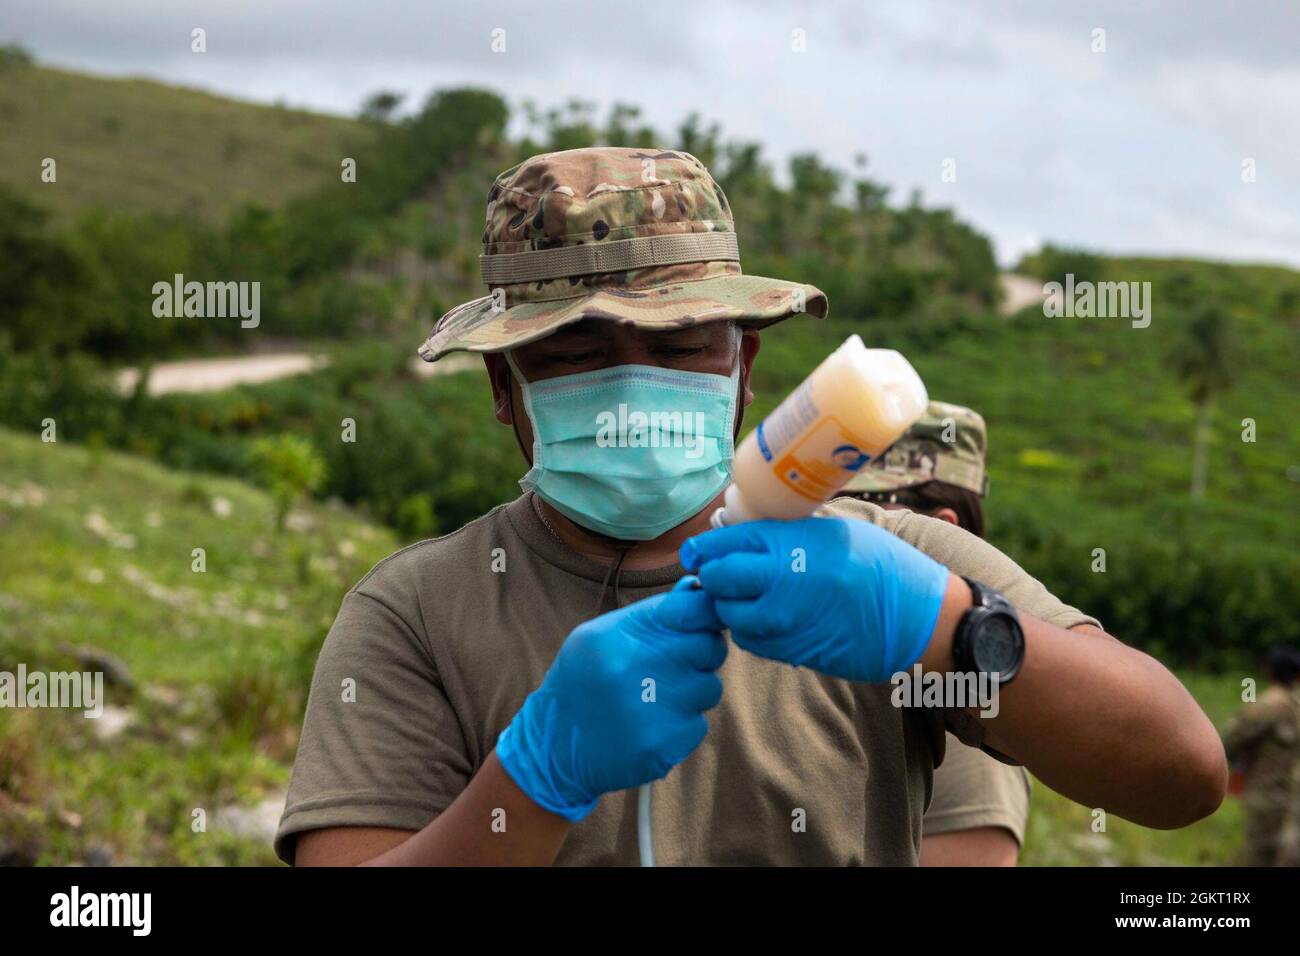 U.S. Army Staff Sgt. Rene Aventura, a field veterinary service technician with the 109th Medical Detachment Veterinary Services out of Garden Grove, California, prepares vaccines for cattle during the Veterinary Readiness Training Exercises portion of Resolute Sentinel 21 in Melchor De Mencos, Guatemala, June 24, 2021. Resolute Sentinel provides joint training and improved readiness of U.S. and partner nation veterinary professionals and support personnel through humanitarian assistance activities. Stock Photo